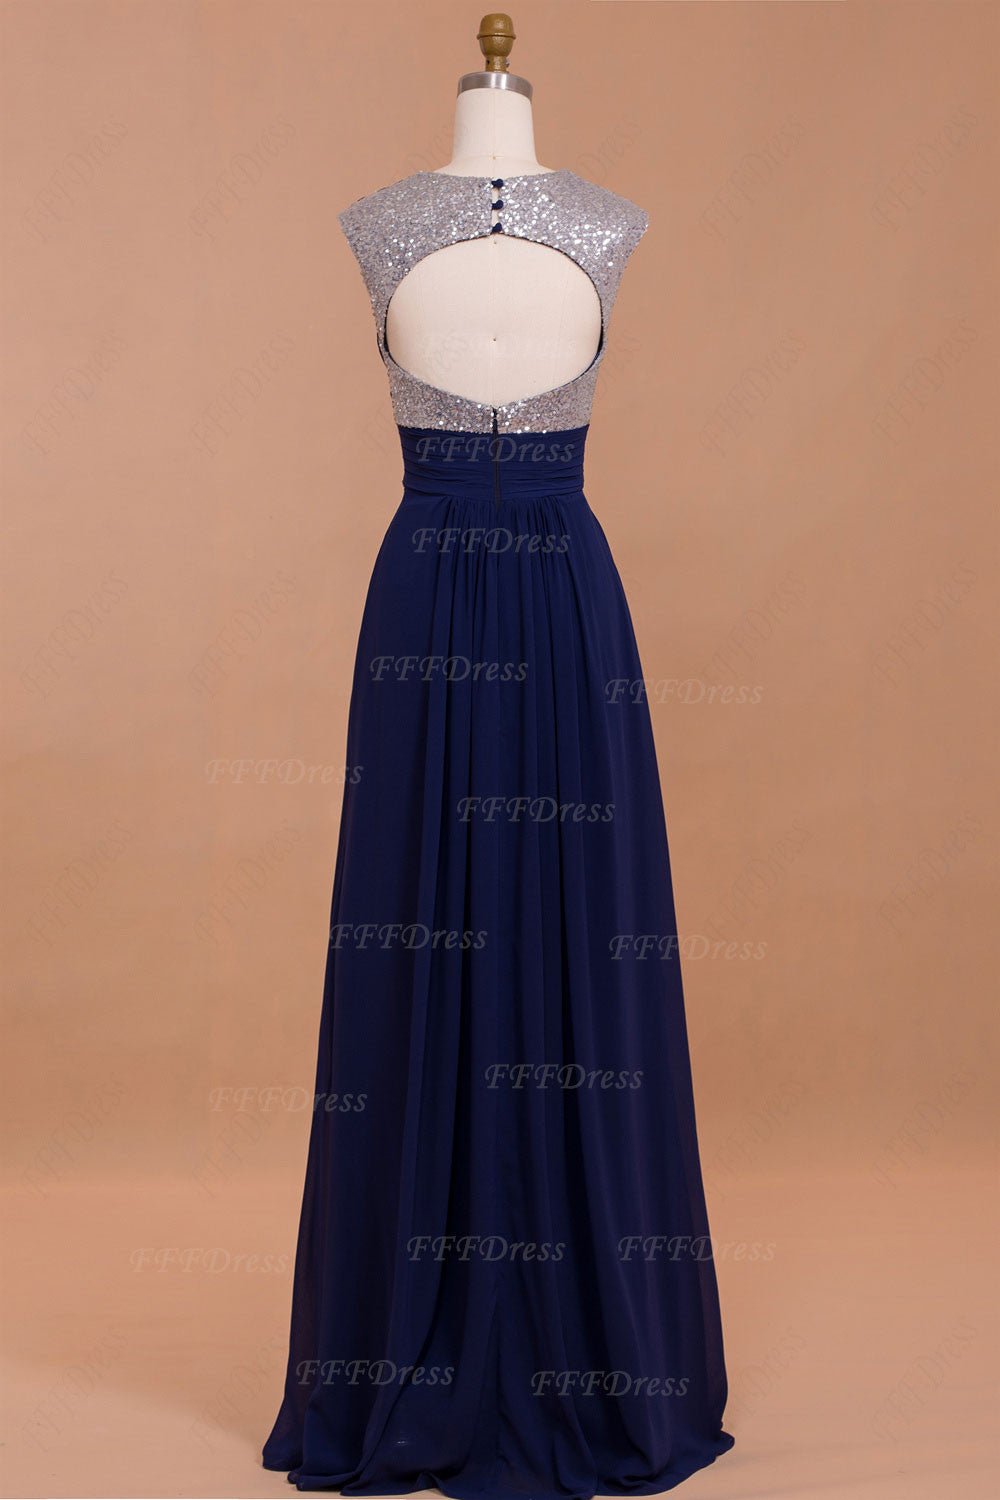 Silver Sequin Navy Blue Backless Prom Dresses